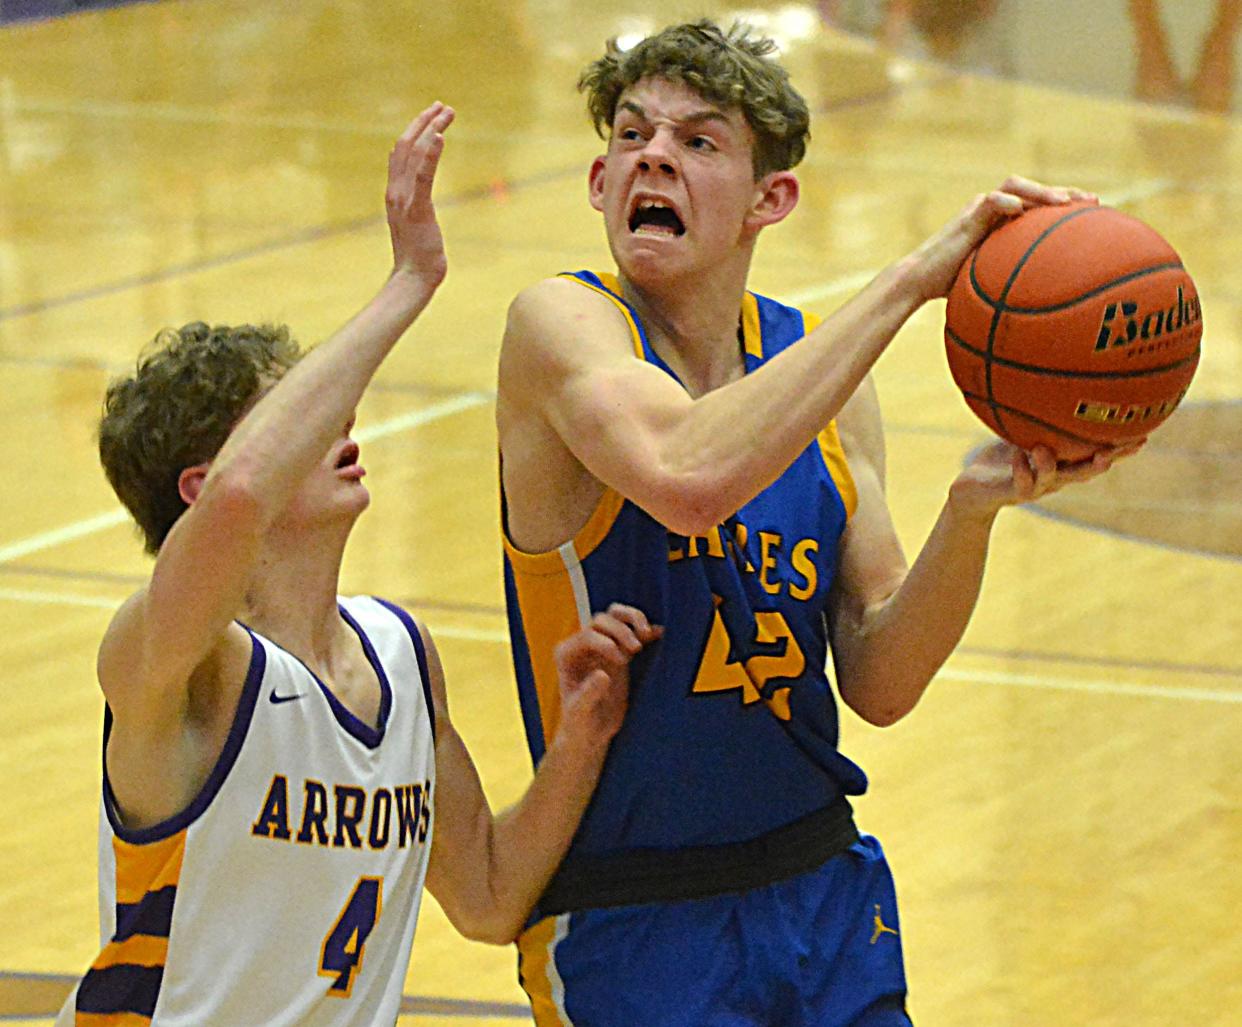 Aberdeen Central's Brendan Phillips drives against Watertown's Dylan Rawdon during their high school boys basketball game on Tuesday, Feb. 13, 2024 in the Watertown Civic Arena. Watertown won 74-71.